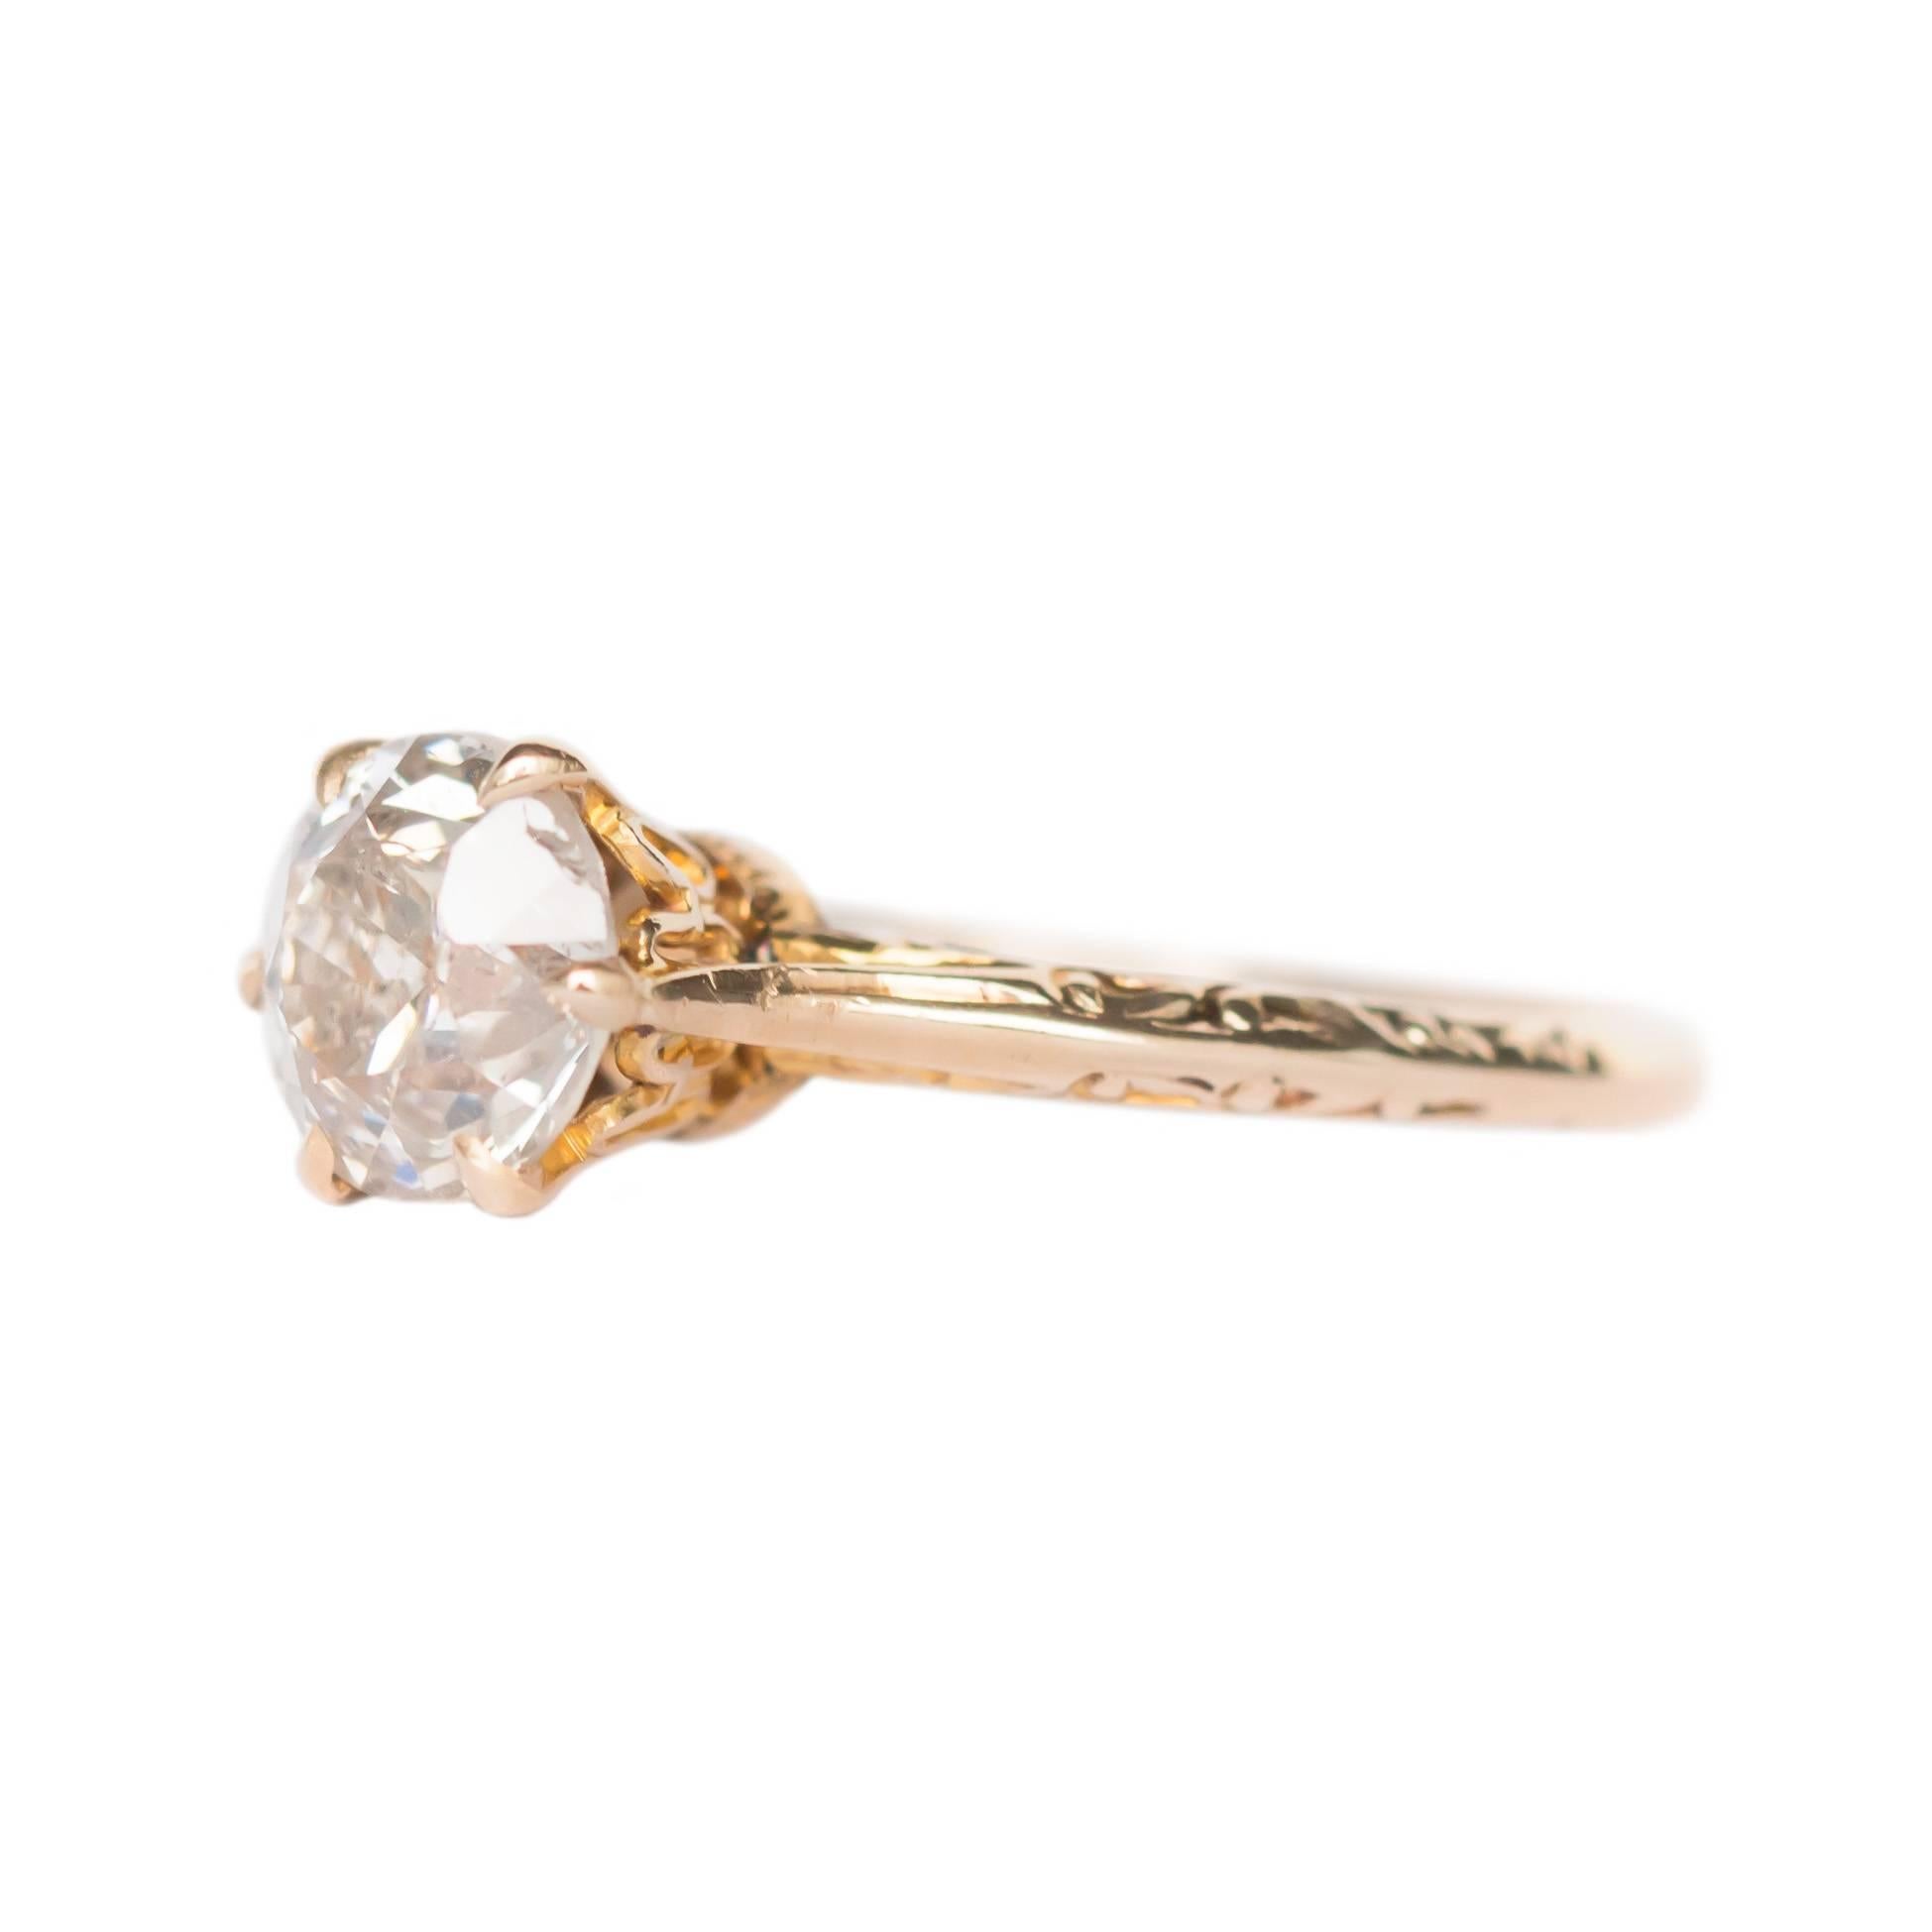 Ring Size: 7.9
Metal Type: 10 Karat Yellow Gold 
Weight: 2.1 grams

Center Diamond Details
Shape: Old European Brilliant 
Carat Weight: 1.75 carat
Color: G
Clarity: I1

Finger to Top of Stone Measurement: 8.07mm